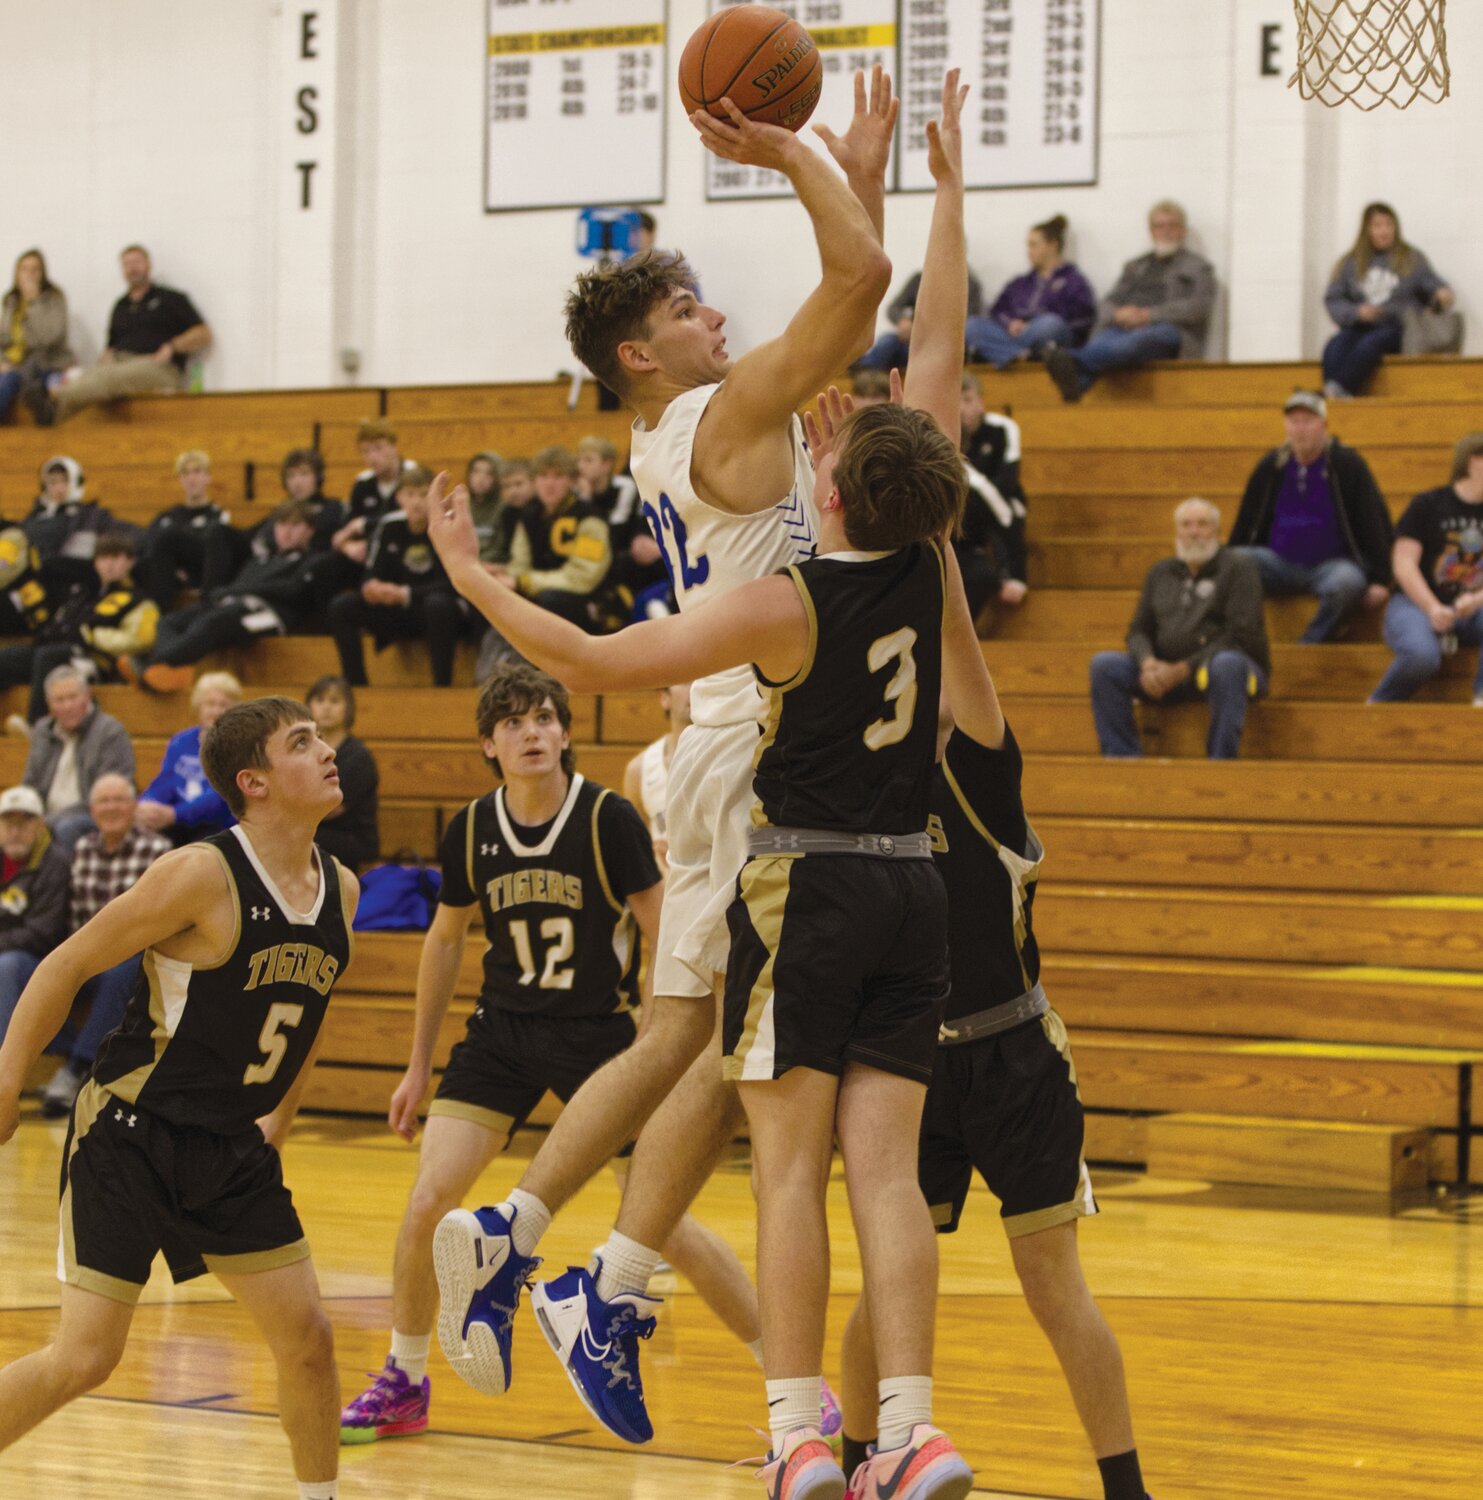 New Franklin’s Drake Clark rises over the Marceline defense. The senior posted a game-high 29 points.